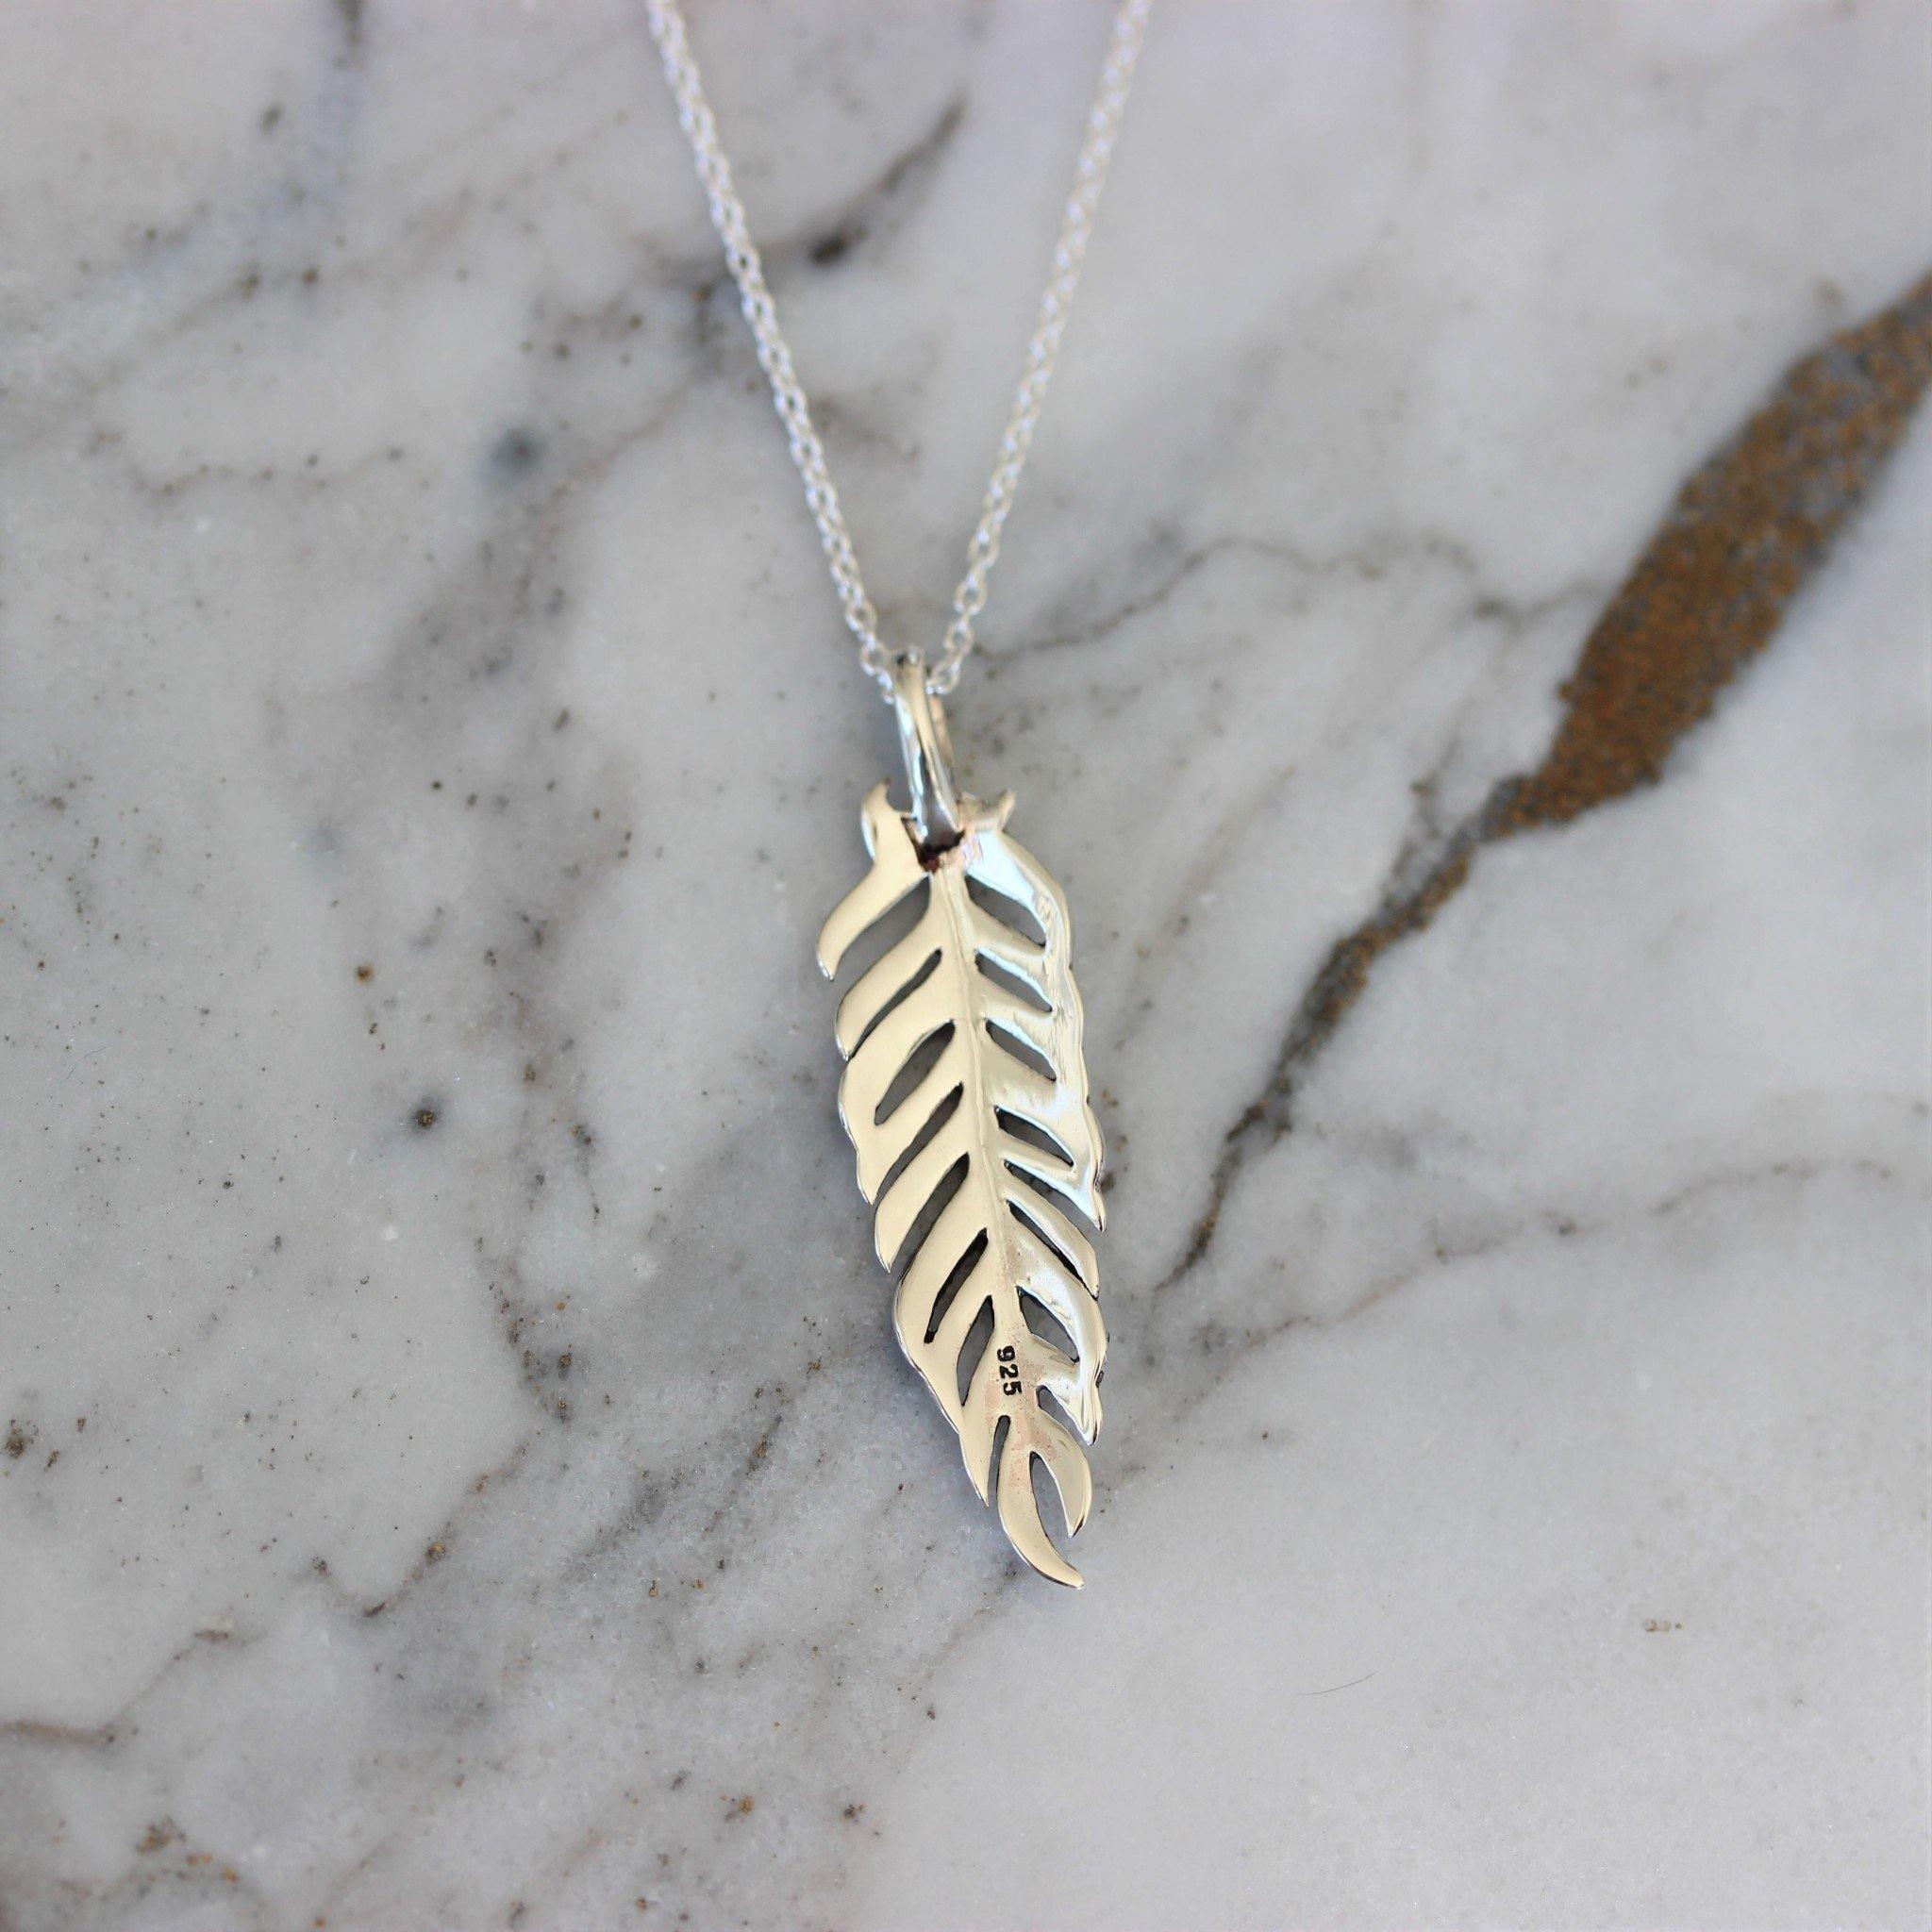 Sterling Silver Marcasite Feather Leaf Leaves Boho Necklace Pendant 42+3cm - STERLING SILVER DESIGNS